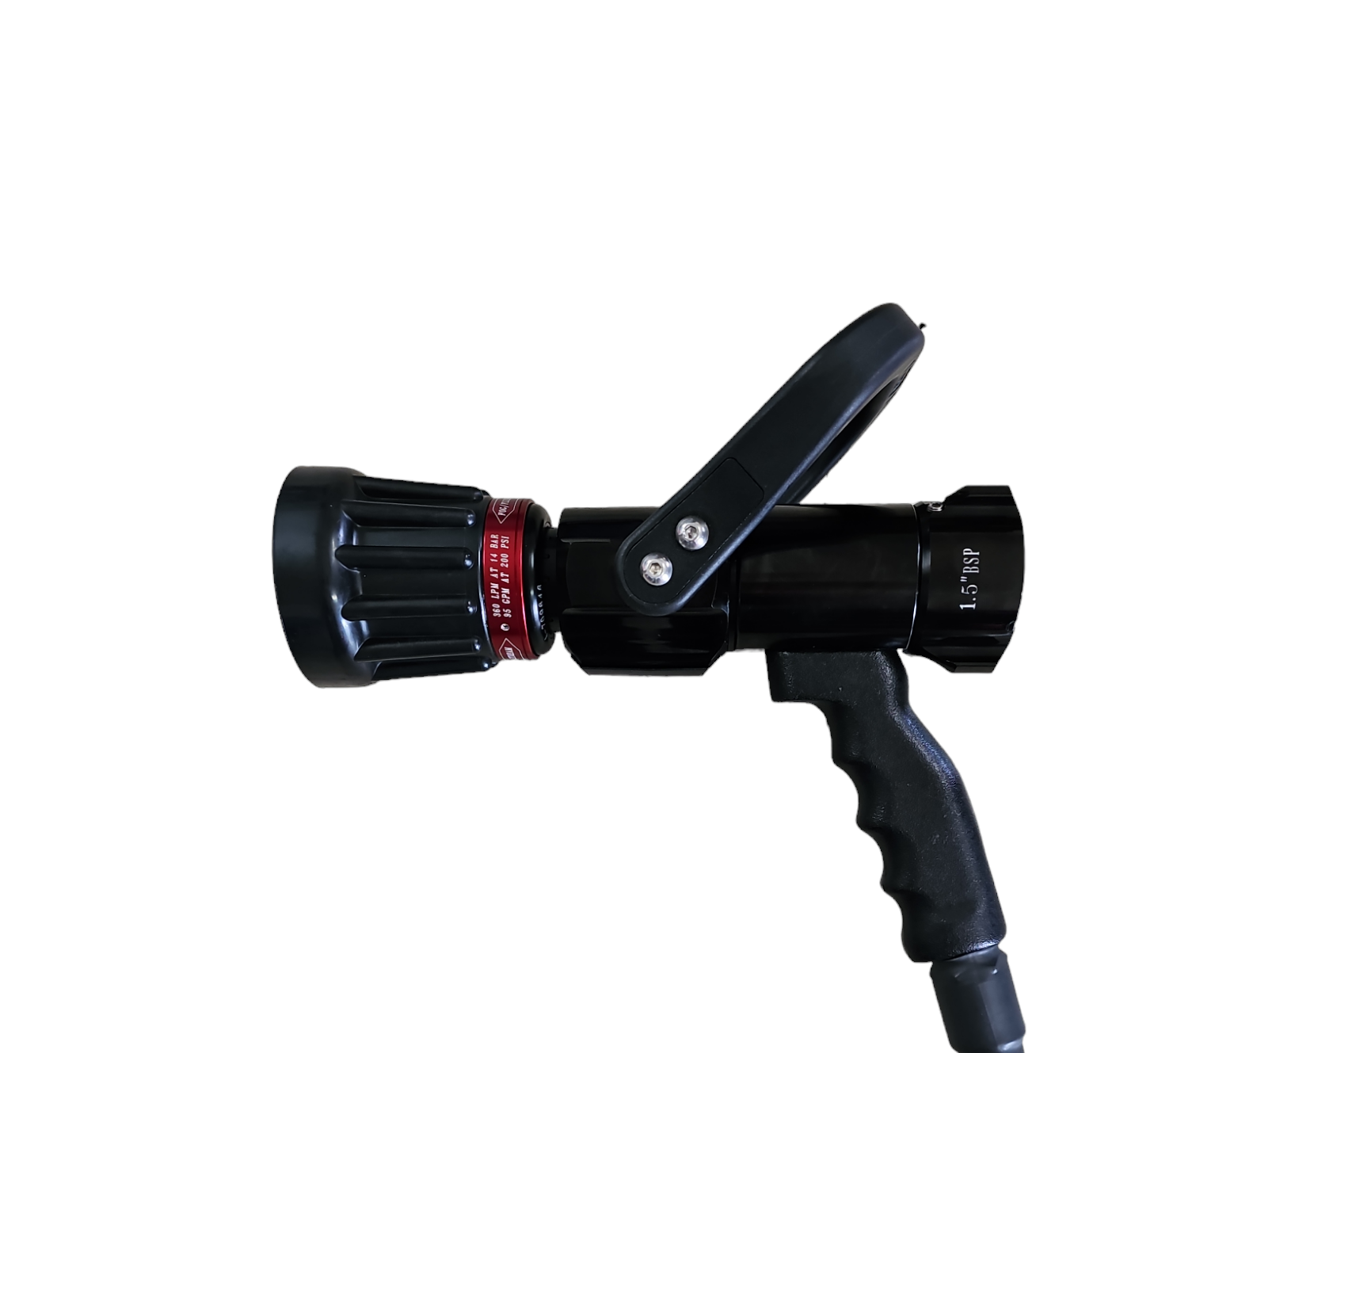 Protek 38mm female self-educting variable pattern nozzle with 230-360-475 LPM flow rate - Premium  from Li-ion Fire solution - Shop now at Firebox Australia